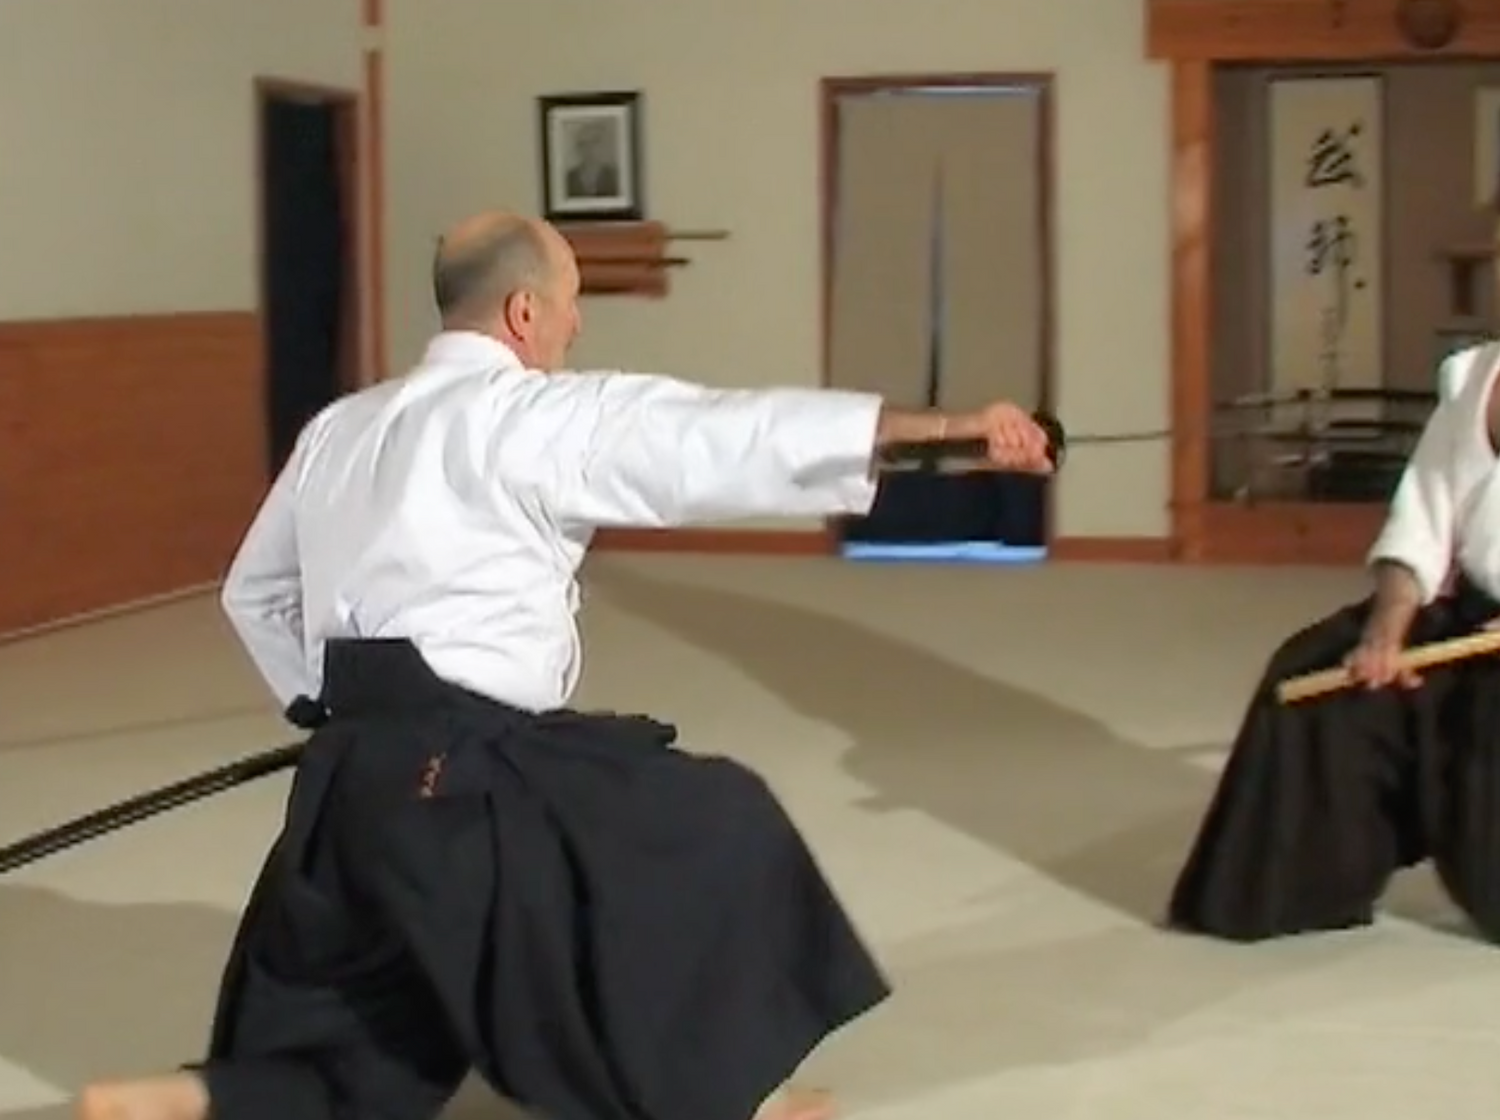 Complete Introduction to Muso Shinden Ryu Iaido with Didier Boyet (On Demand)